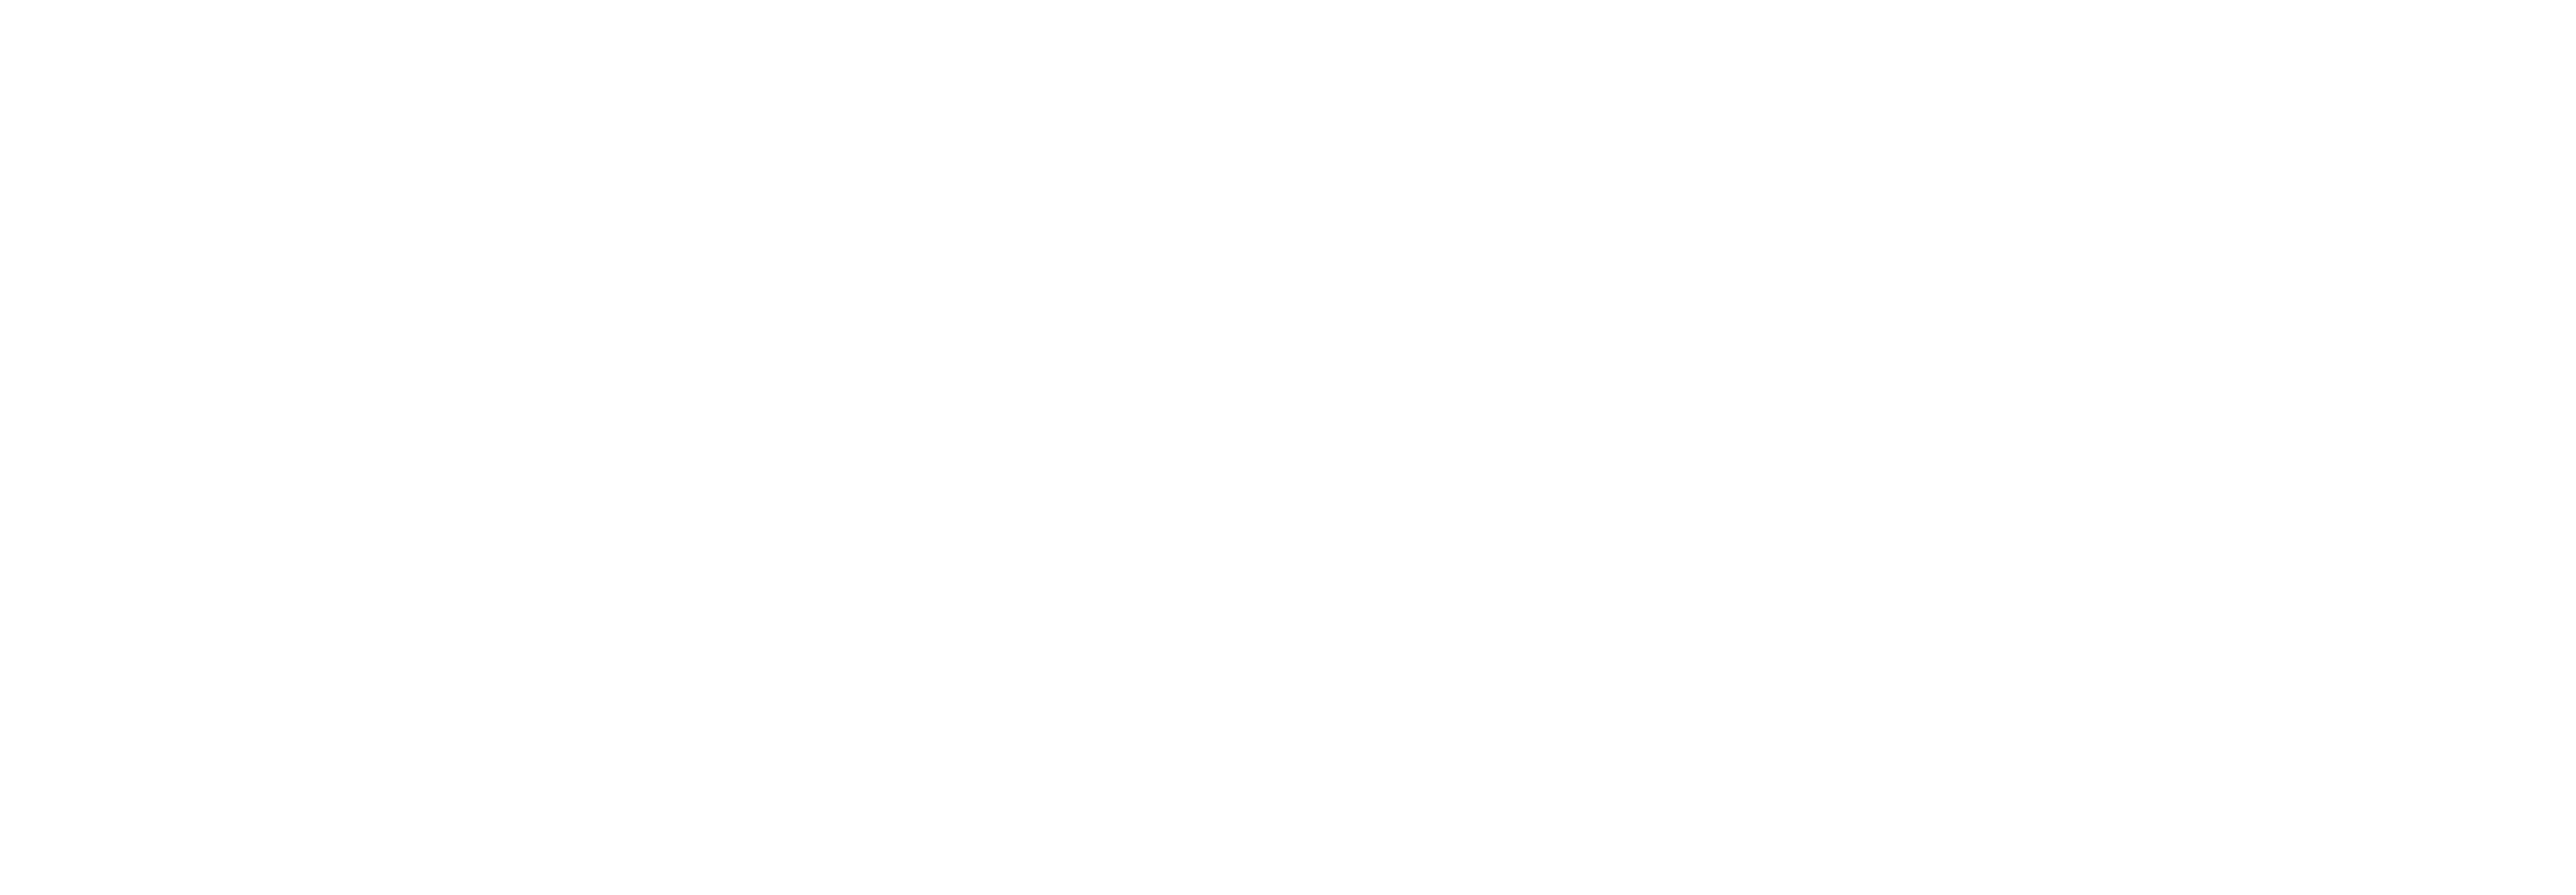 bmgroup.md